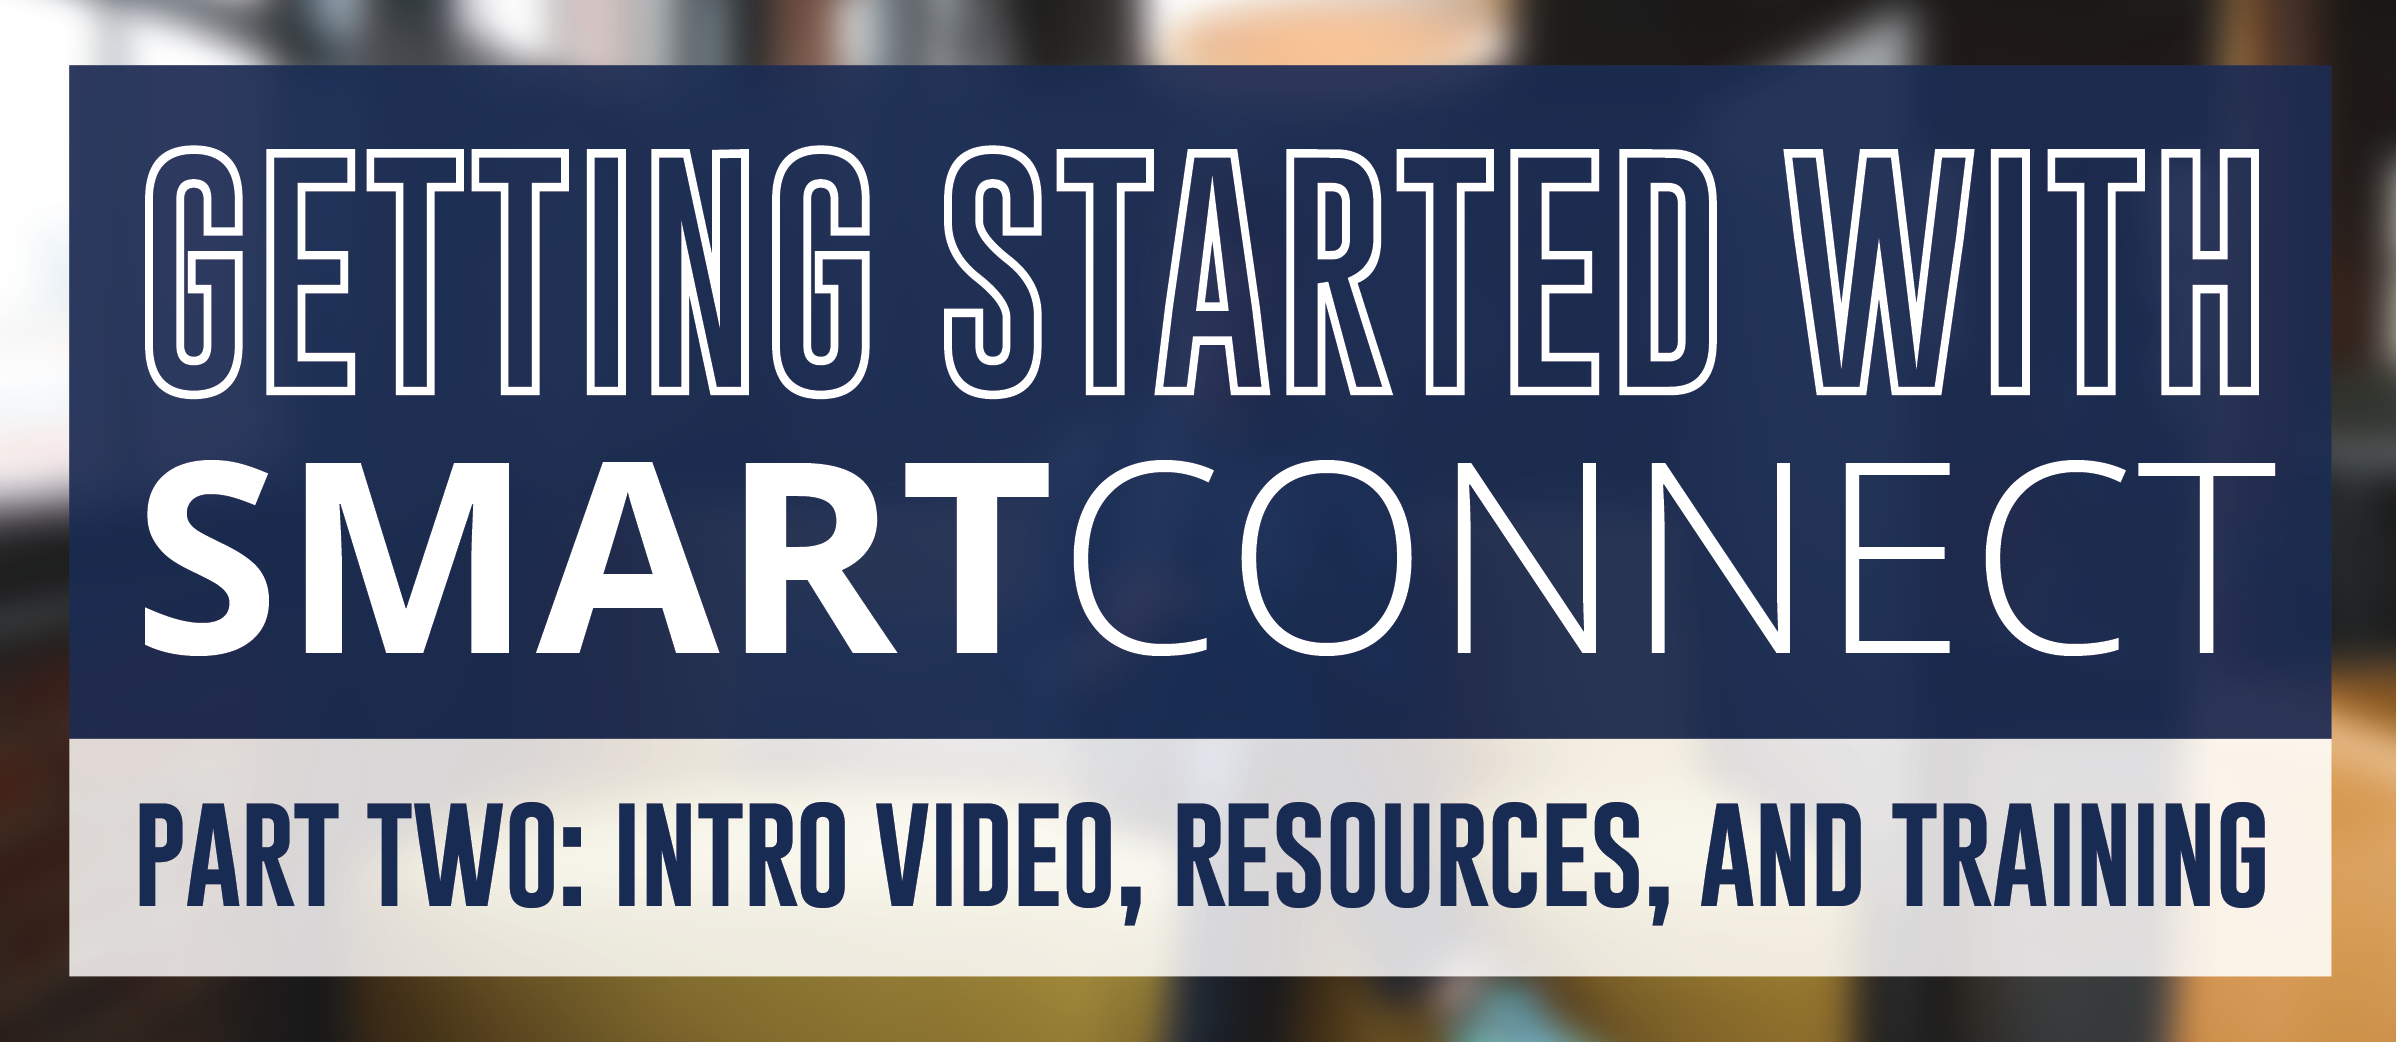 Getting Started with SmartConnect Part 2